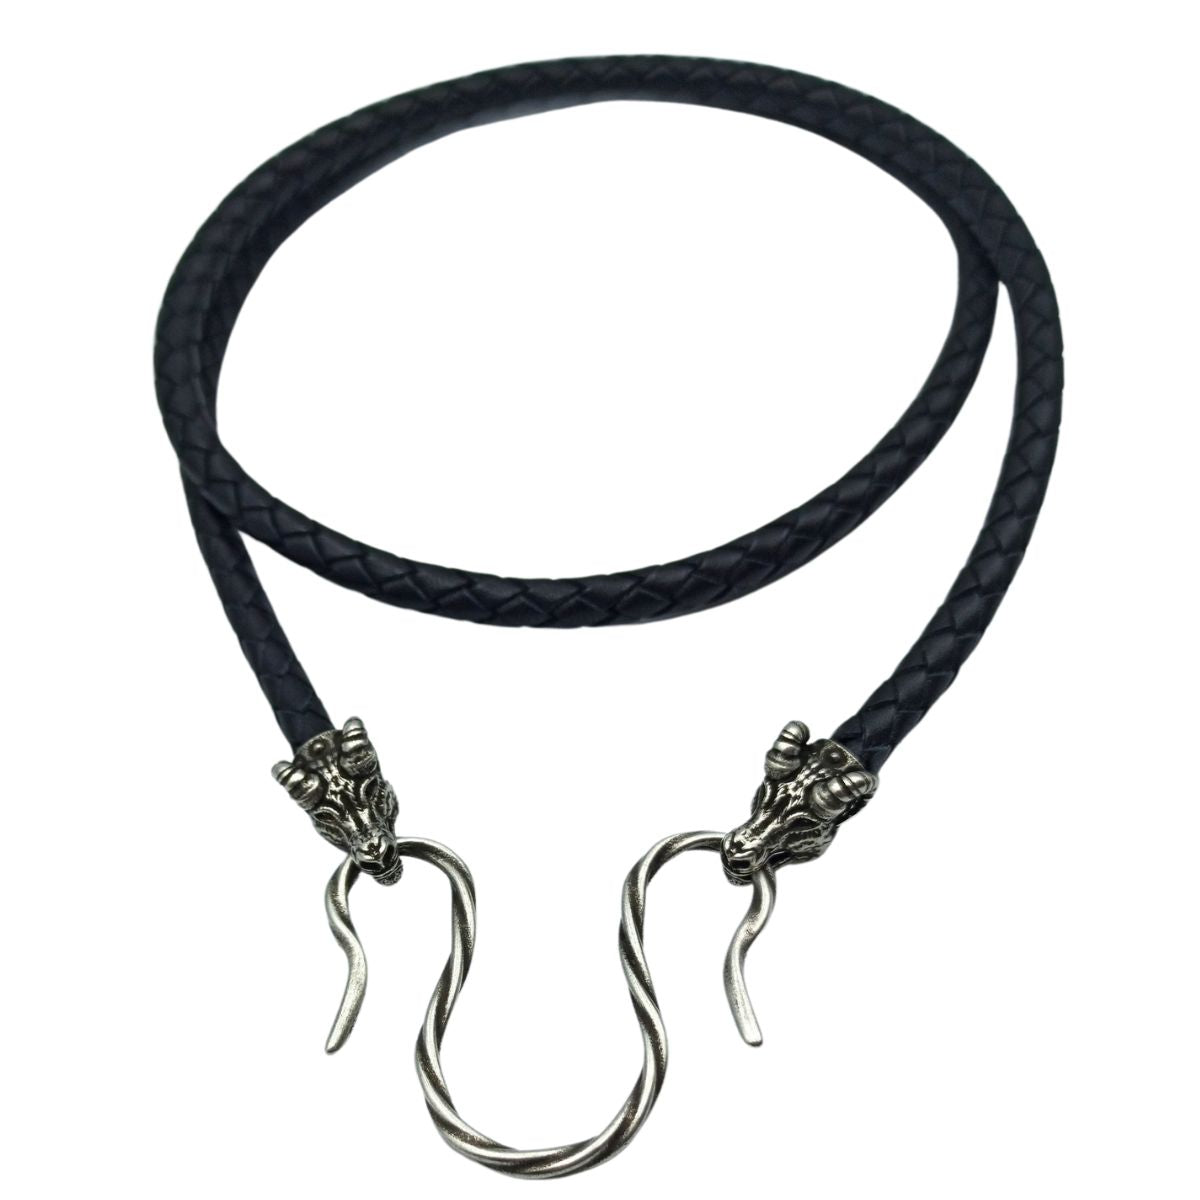 Thors Goats leather necklace with Silver plated clasps